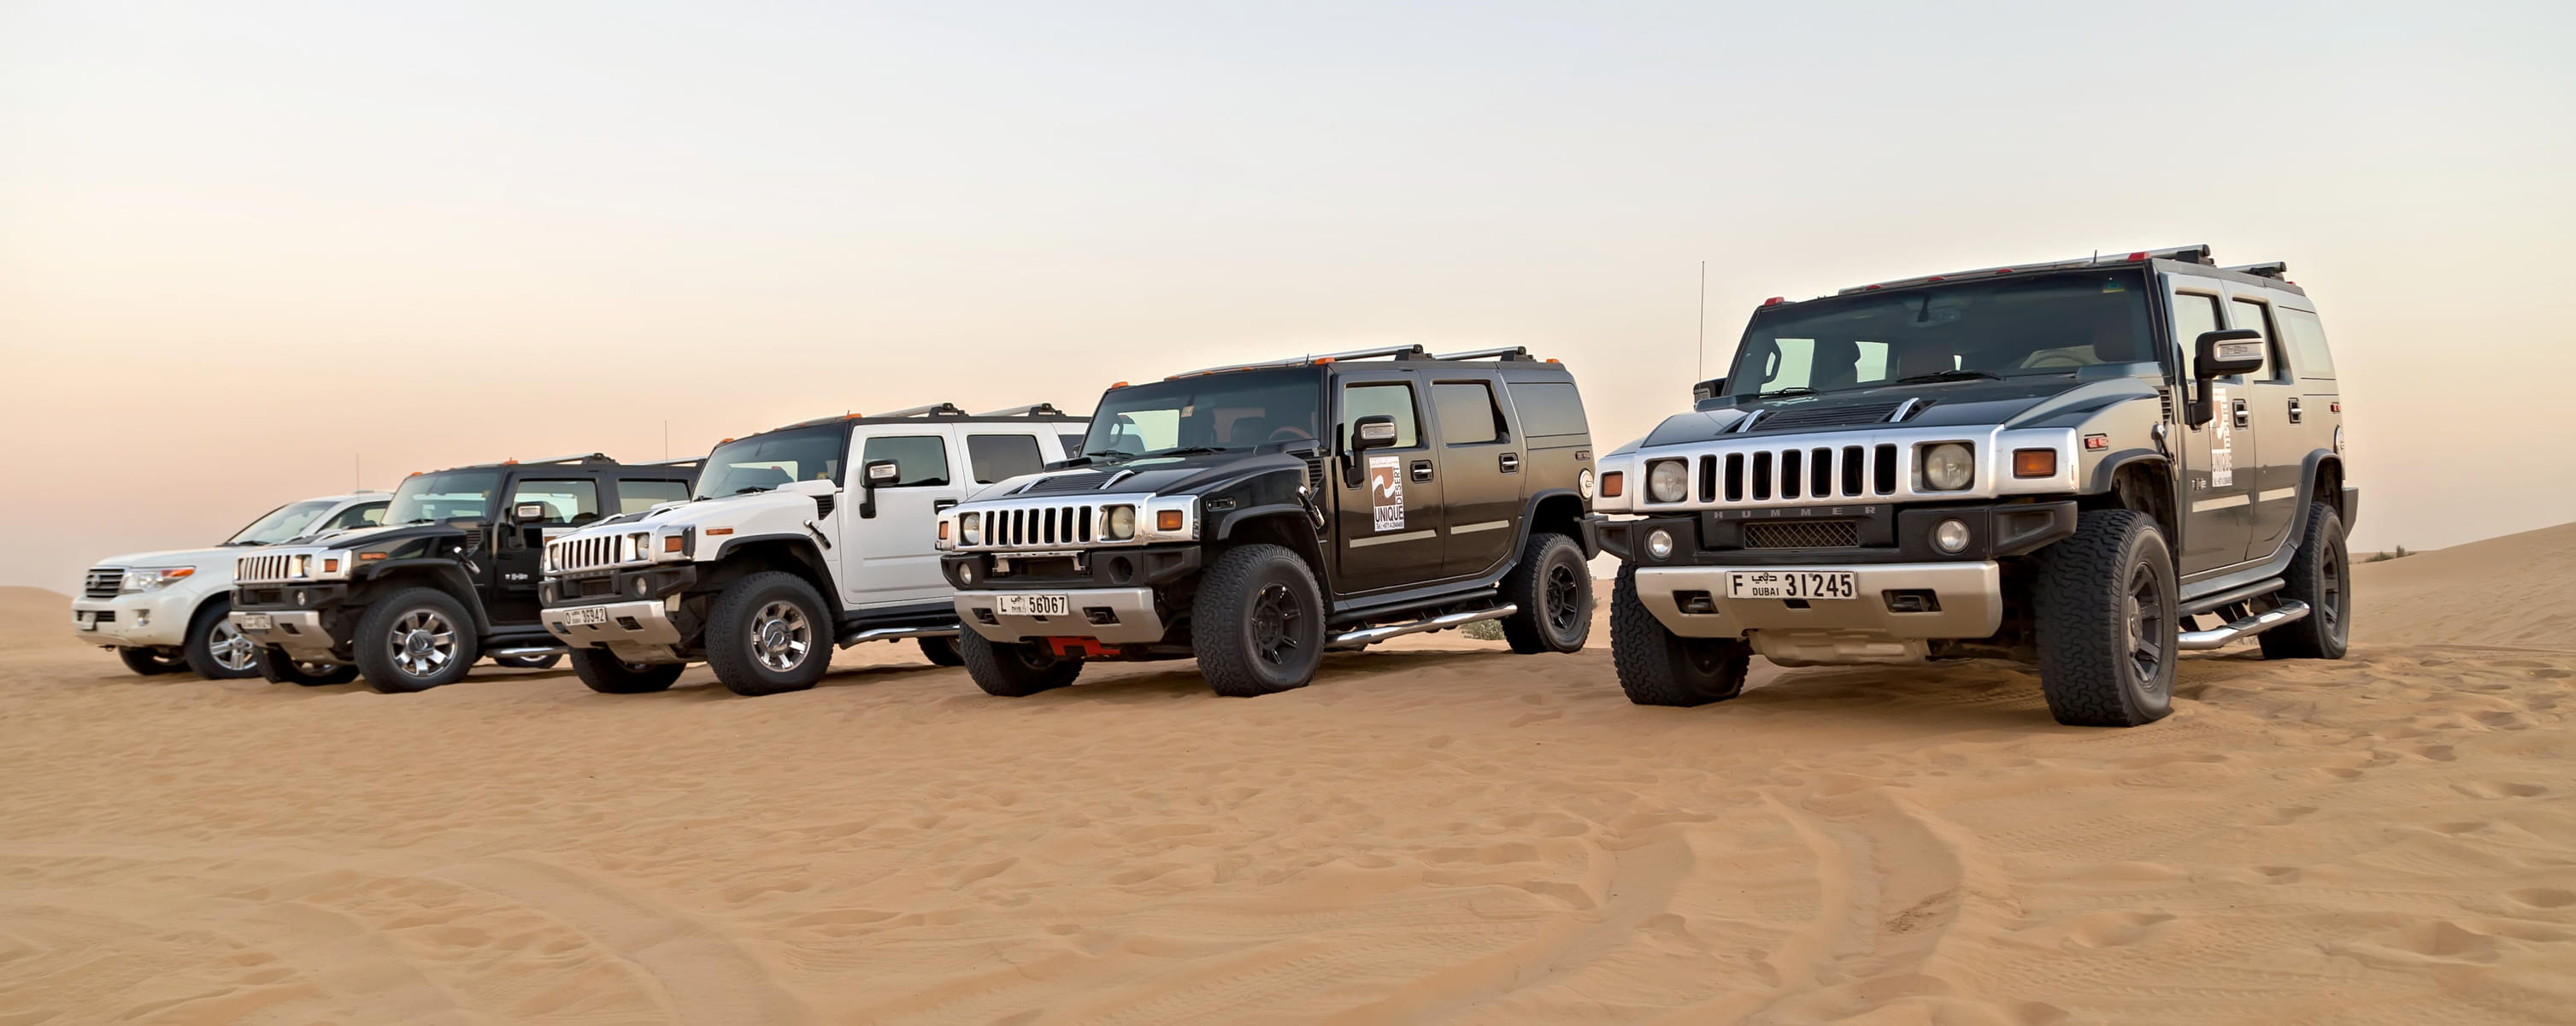 Hummer lined up in the Desert